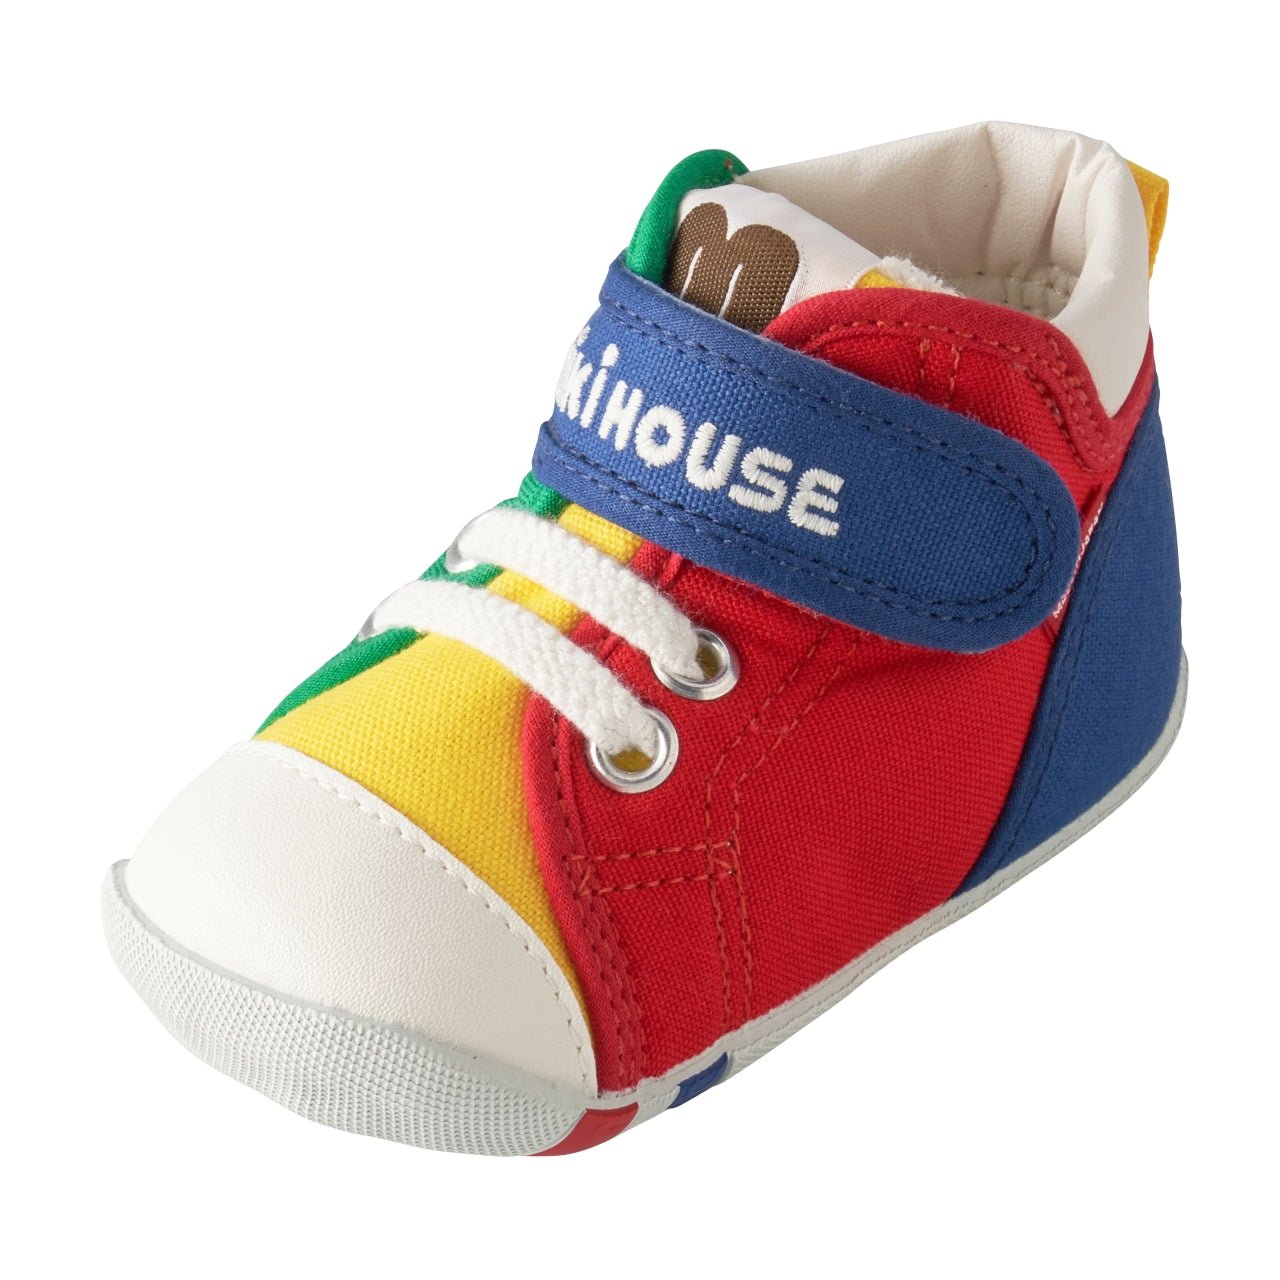 Classic High-Top “First Walker” Shoes - MIKI HOUSE USA